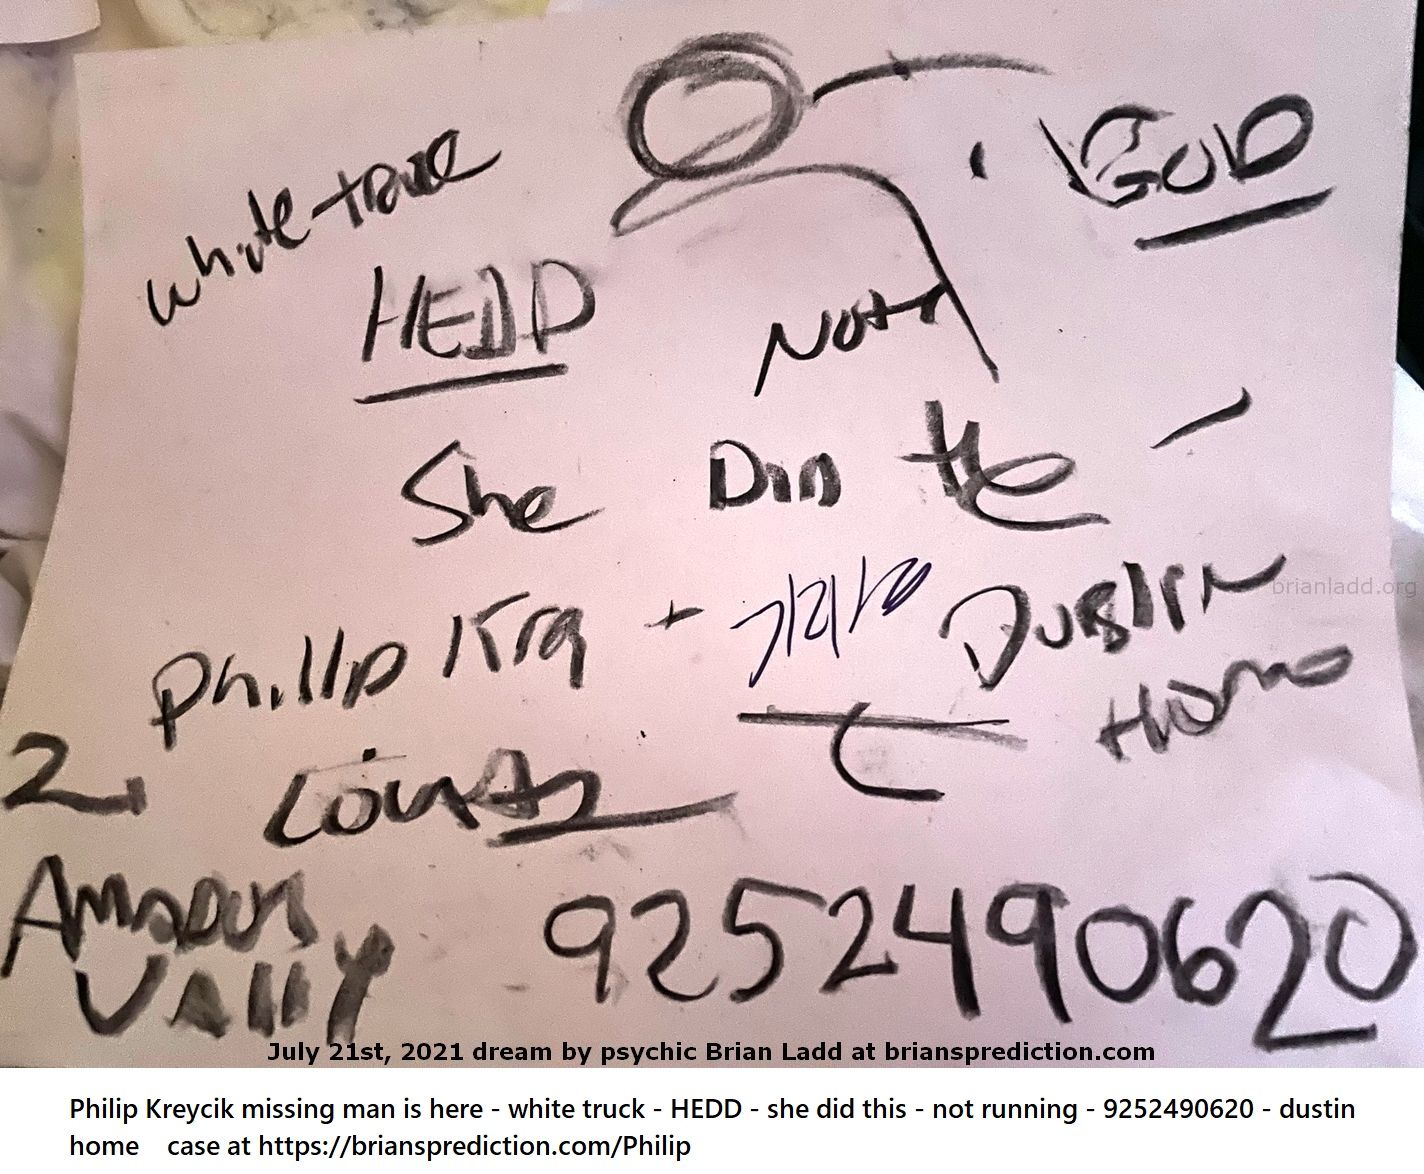 21 July 2021 4 Philip Kreycik Missing Man Is Here White Truck Hedd She Did This Not Running 9252490620 Dustin Home  - Ph...
Philip Kreycik missing man is here - white truck - HEDD - she did this - not running - 9252490620 - dustin home case at  https://briansprediction.com/Philip
